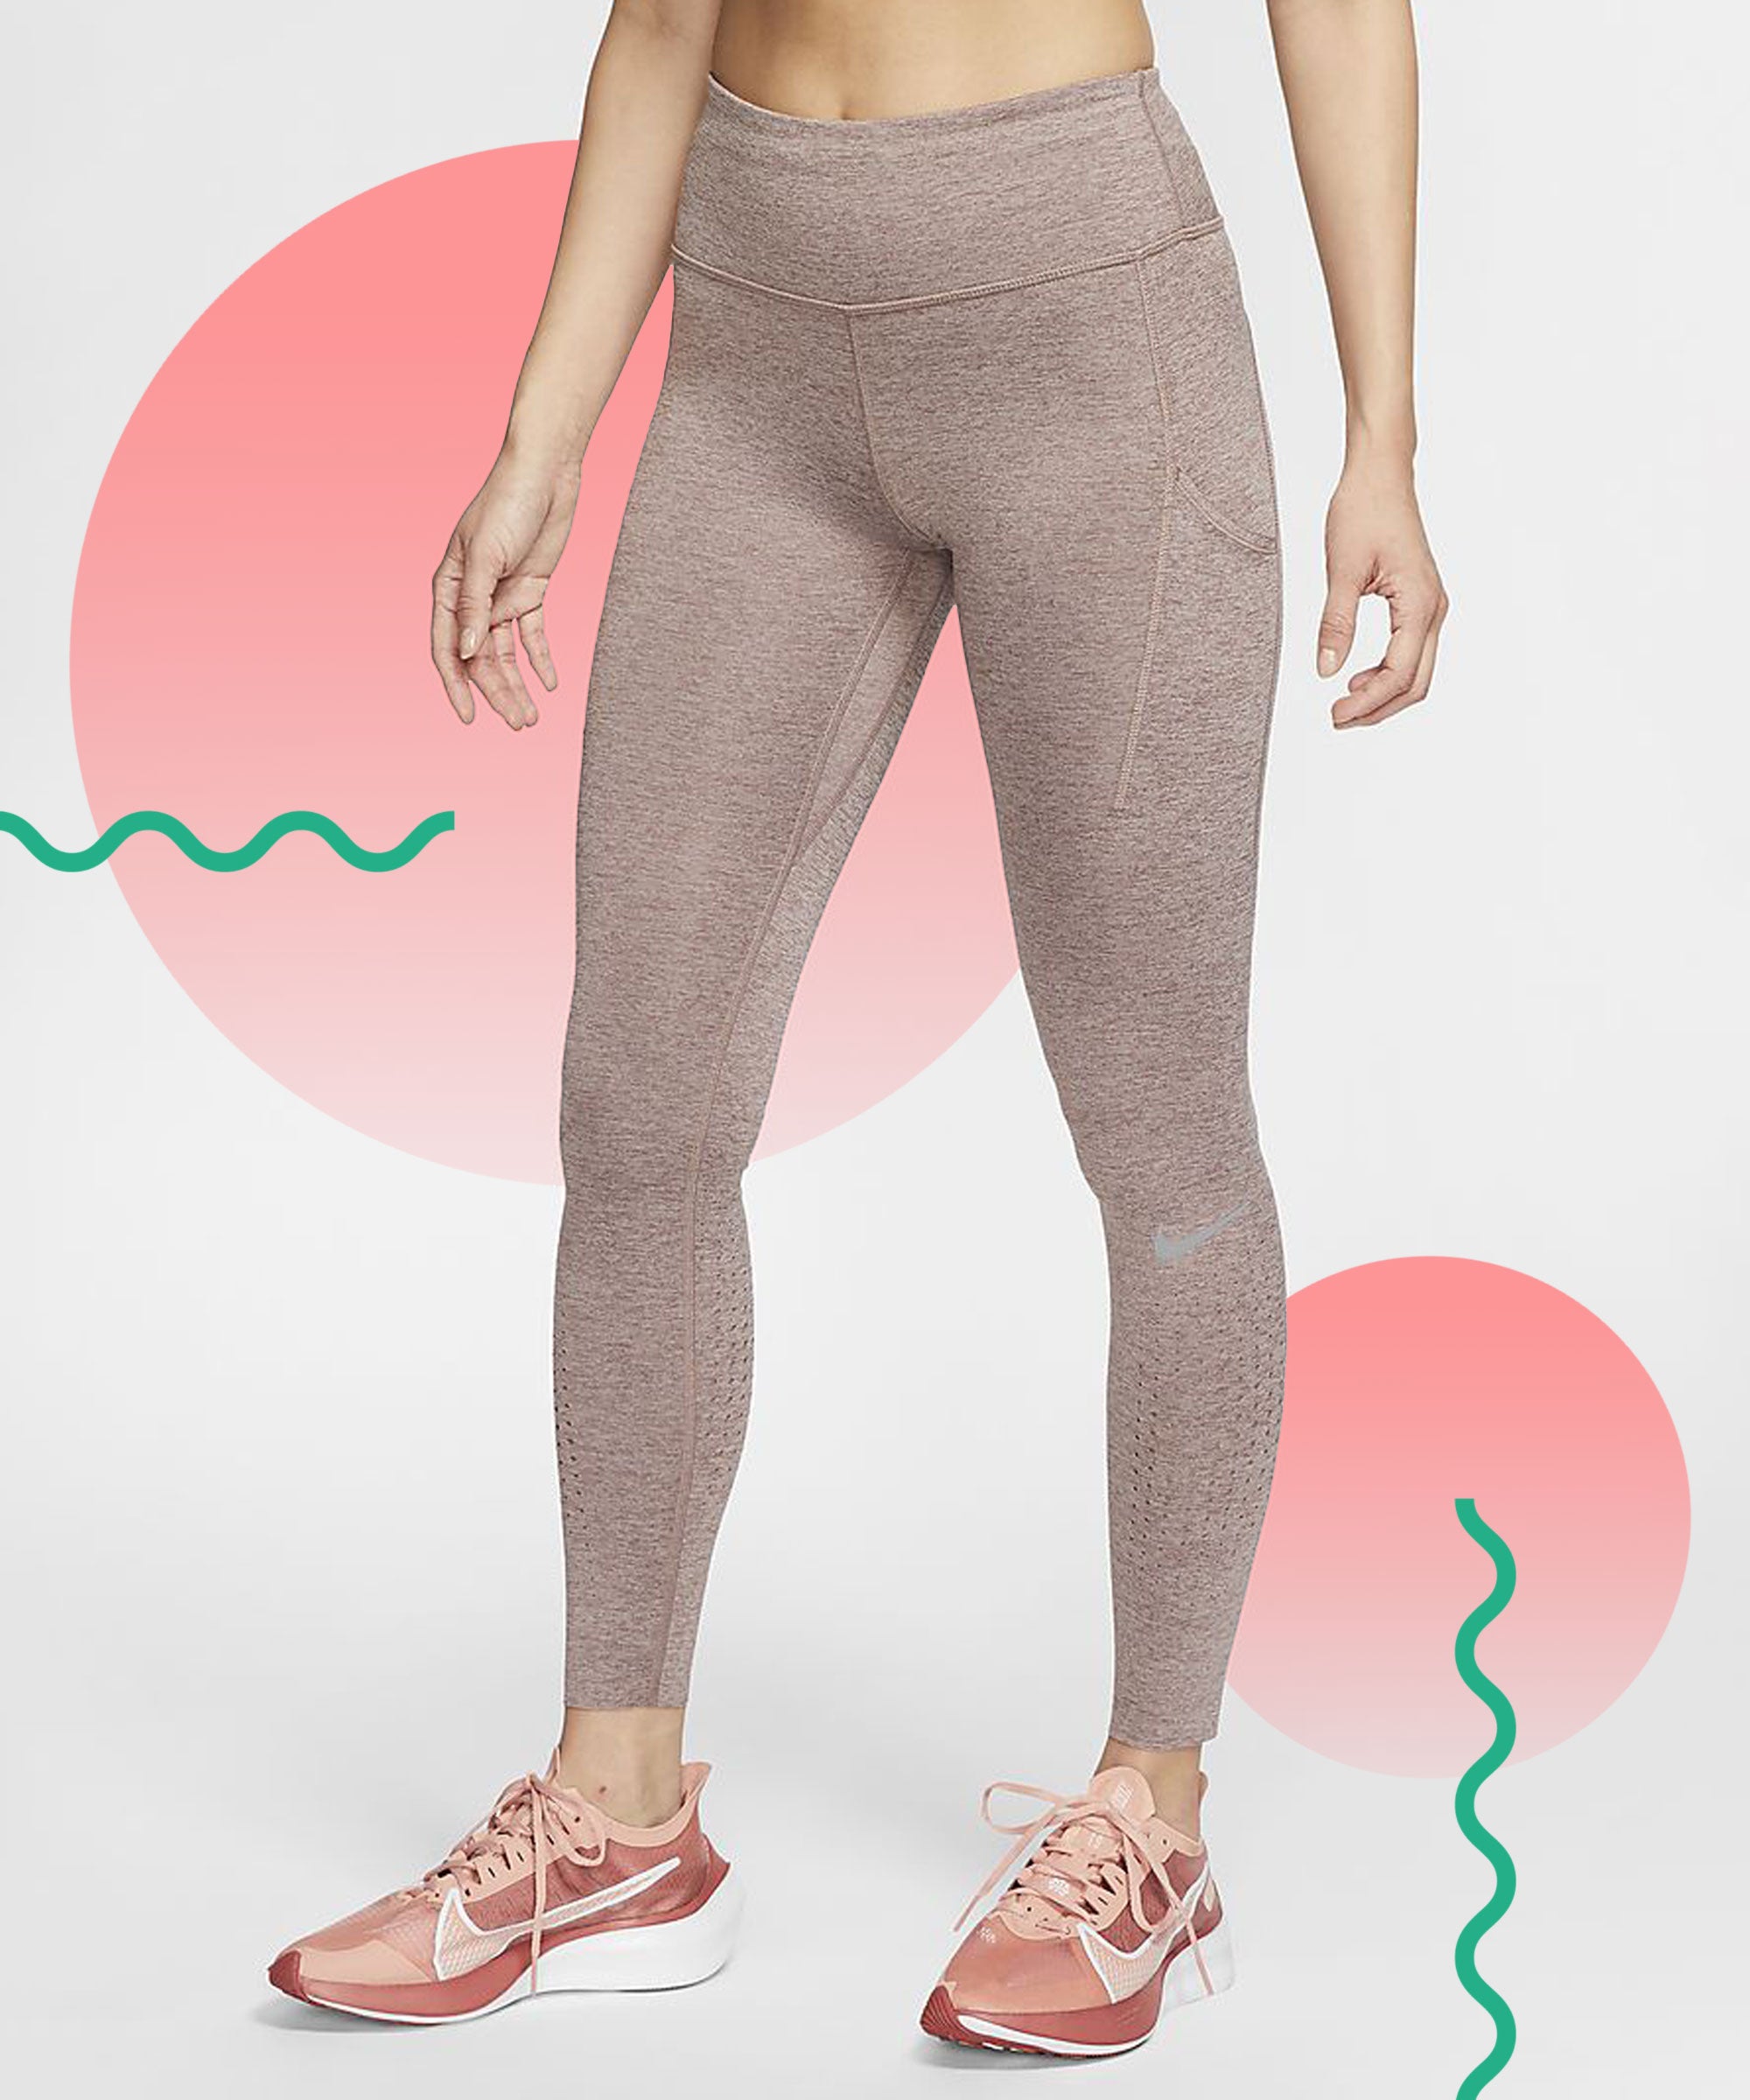 Lululemon Just Launched the Best Running Leggings